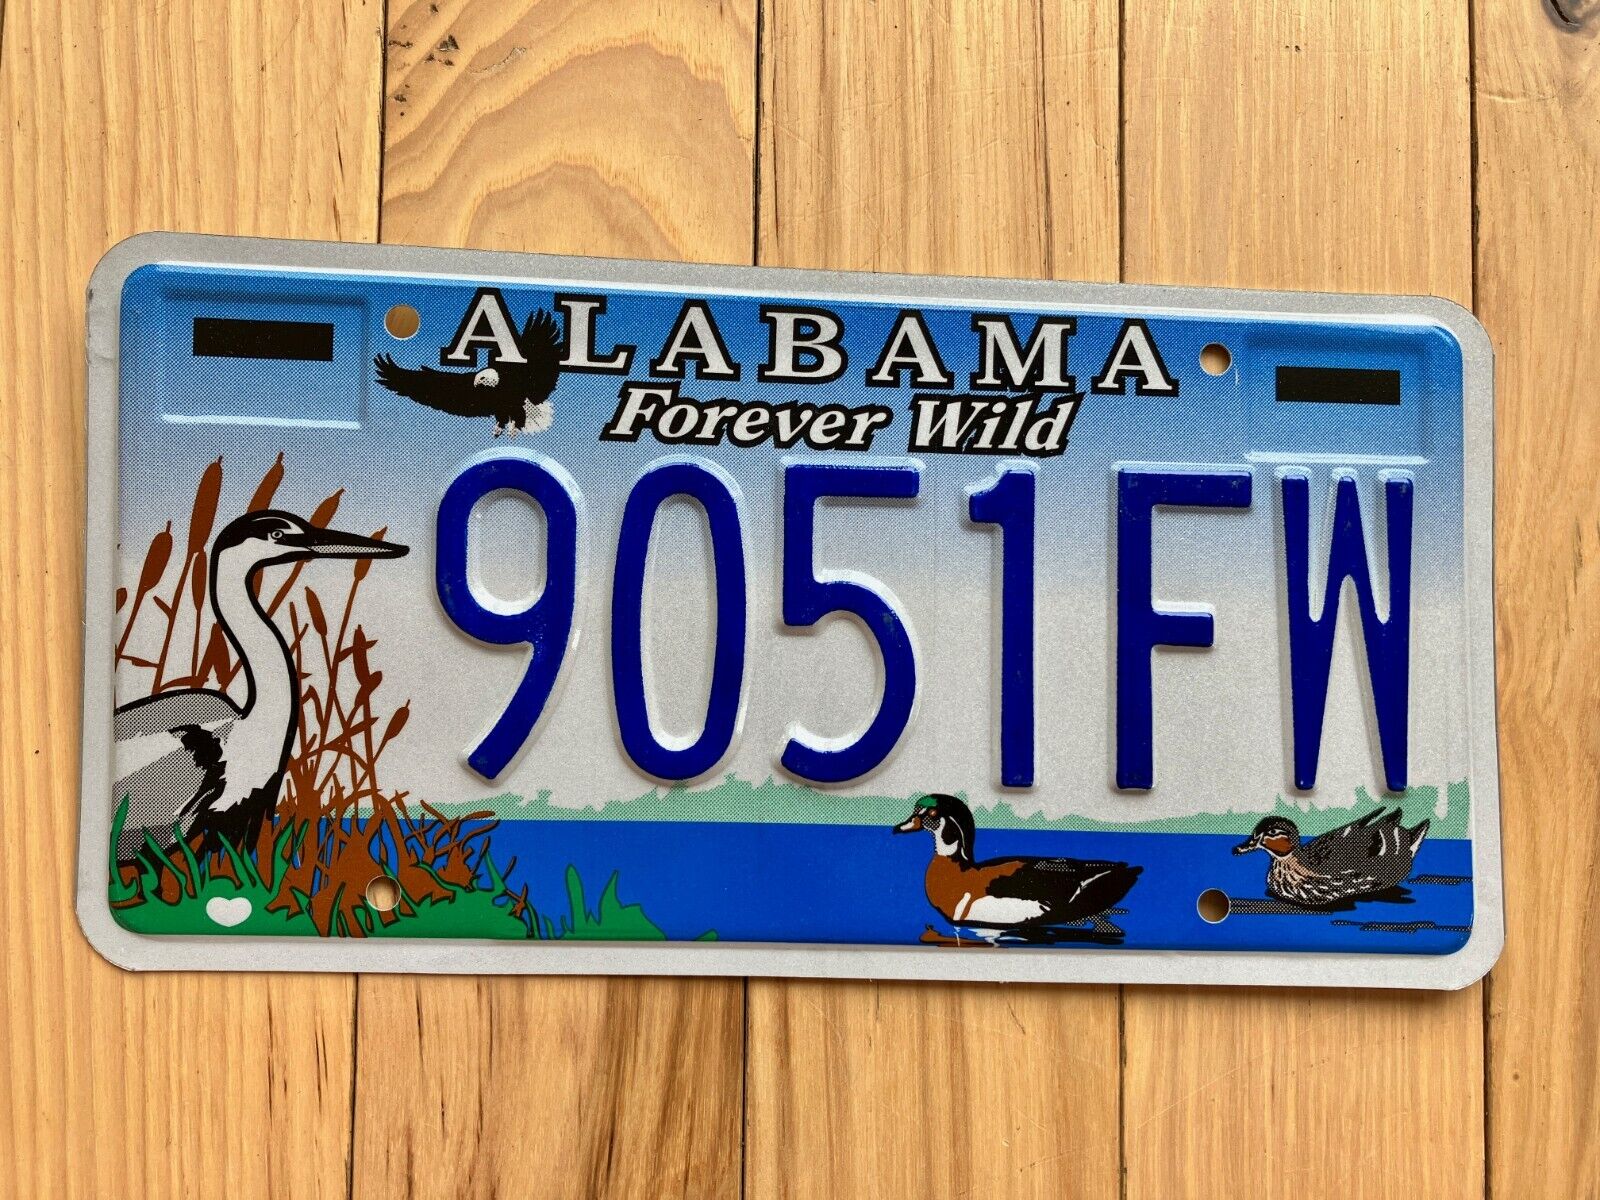 2005 to 2015 Alabama Forever Wild License Plate